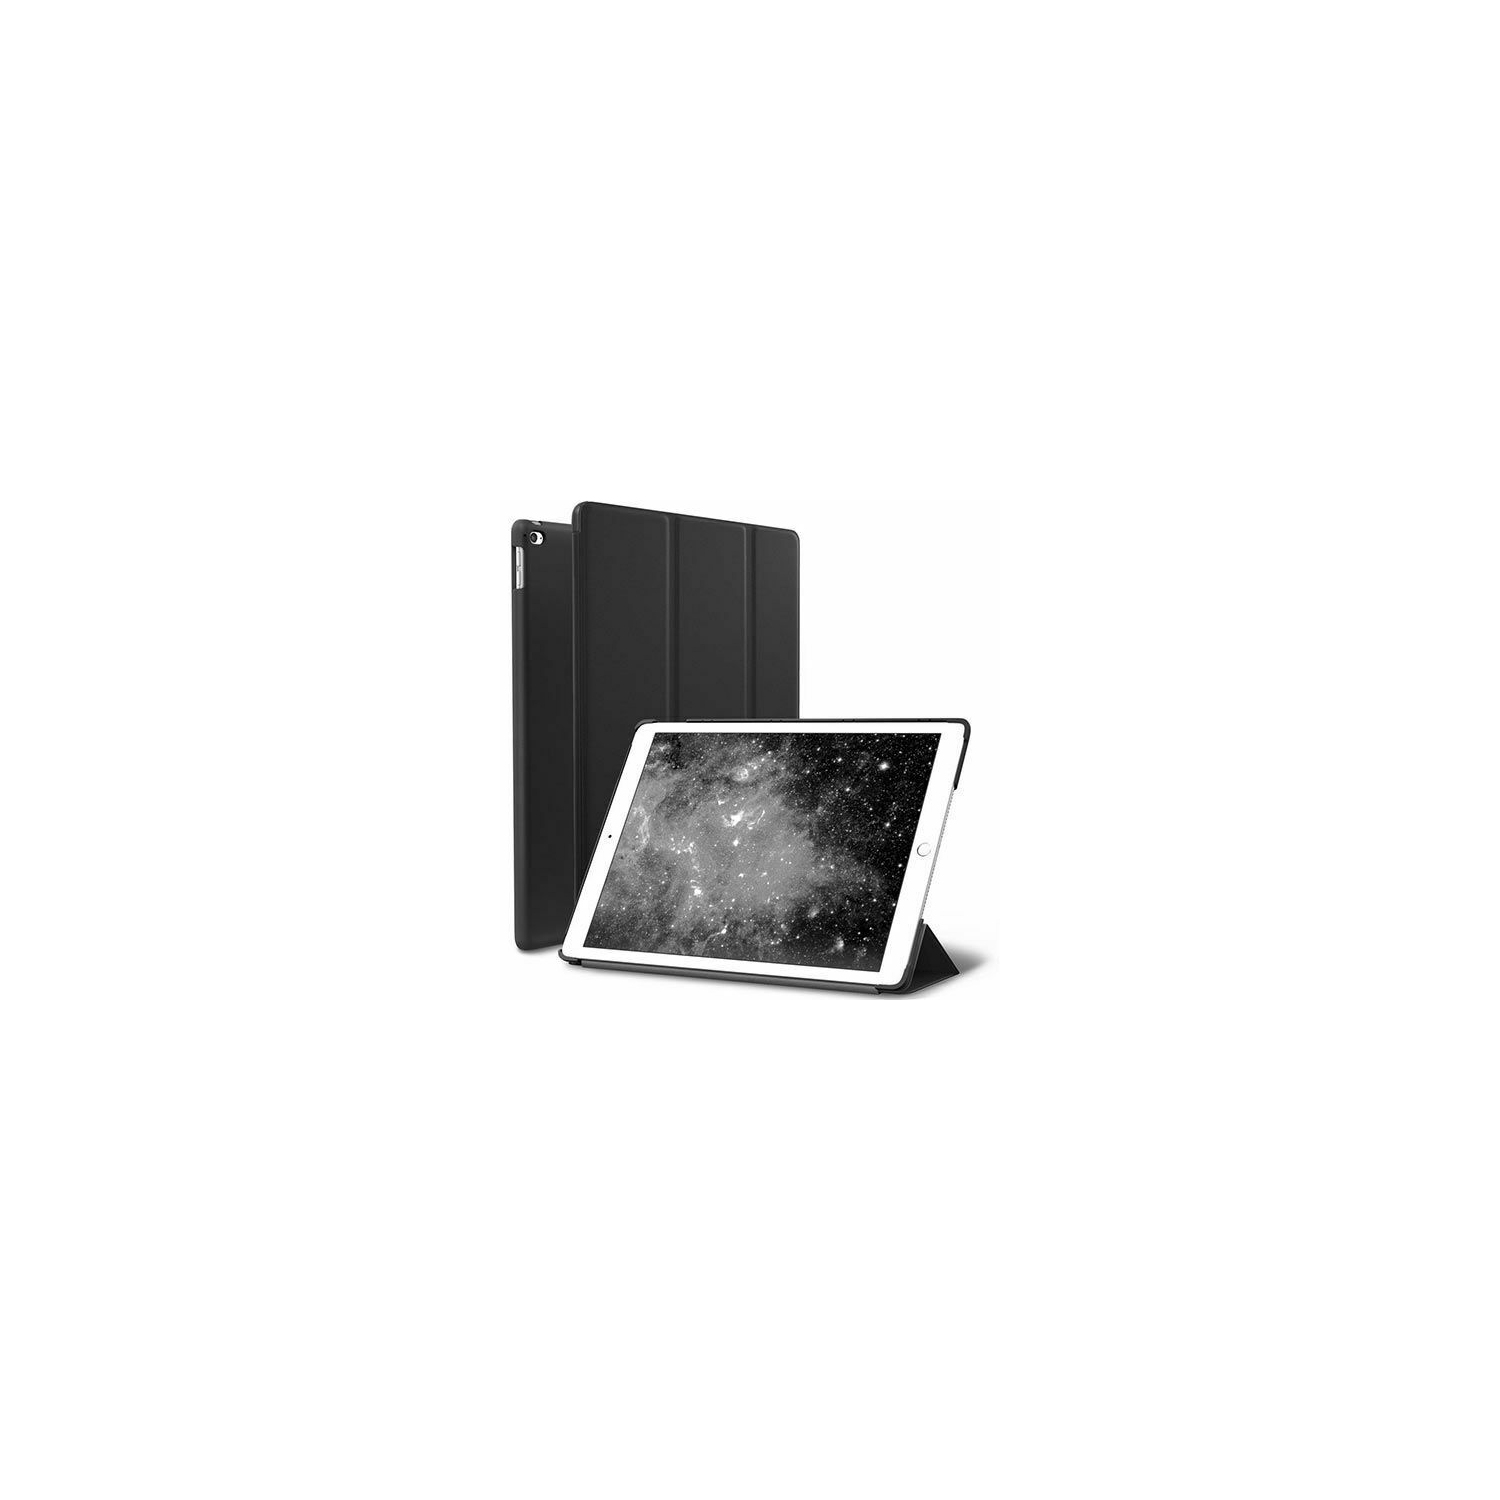 【CSmart】 Slim Magnetic Smart Cover Stand Case for iPad 5th 6th Gen / Air 1 2 1st 2nd Gen (9.7"), Black